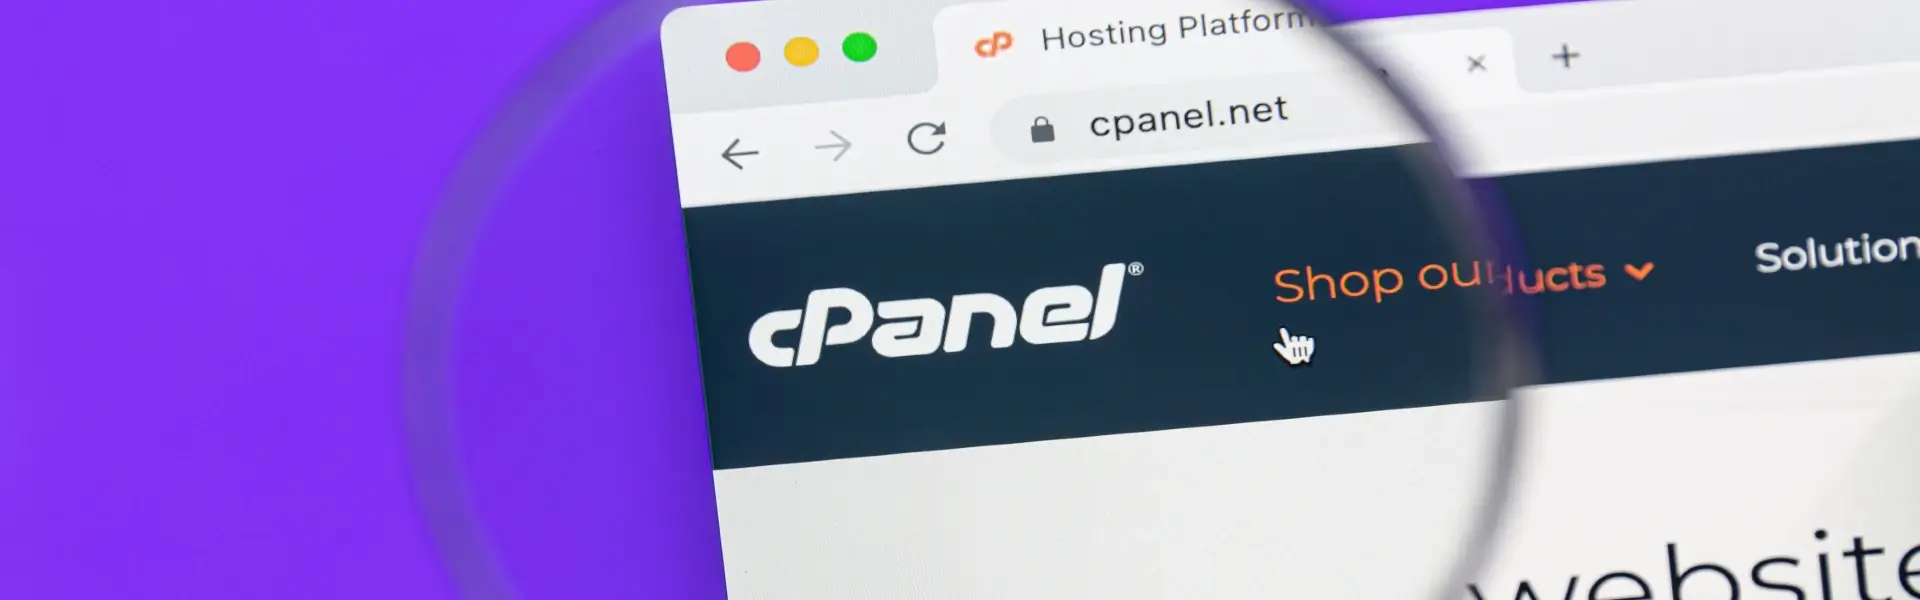 Best Free Hosting with cPanel-